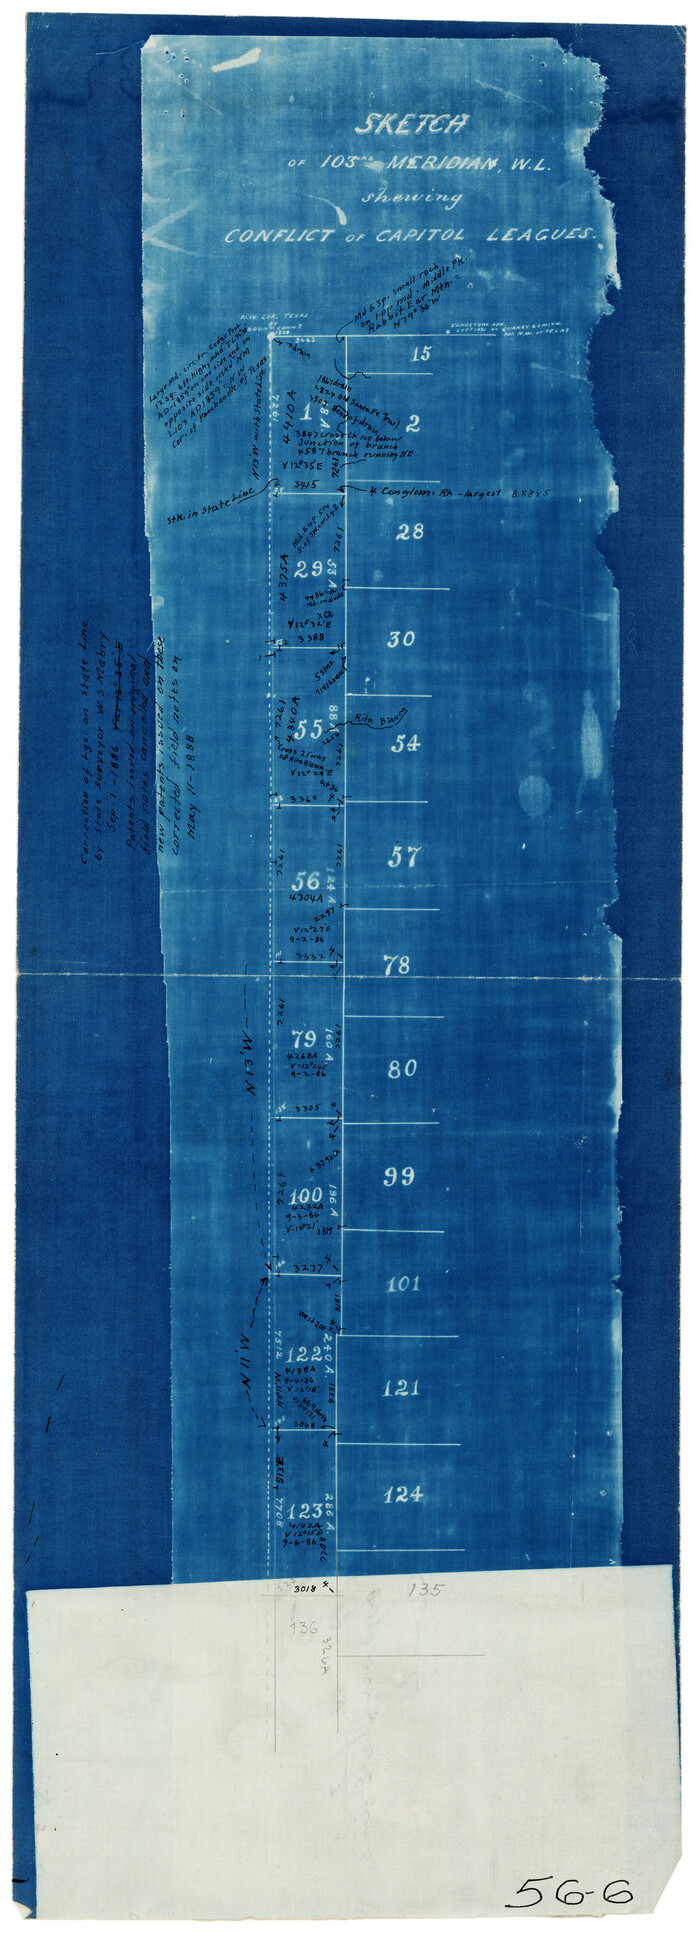 90578, Sketch of 103rd Meridian, W. L. showing Conflict of Capitol Leagues, Twichell Survey Records